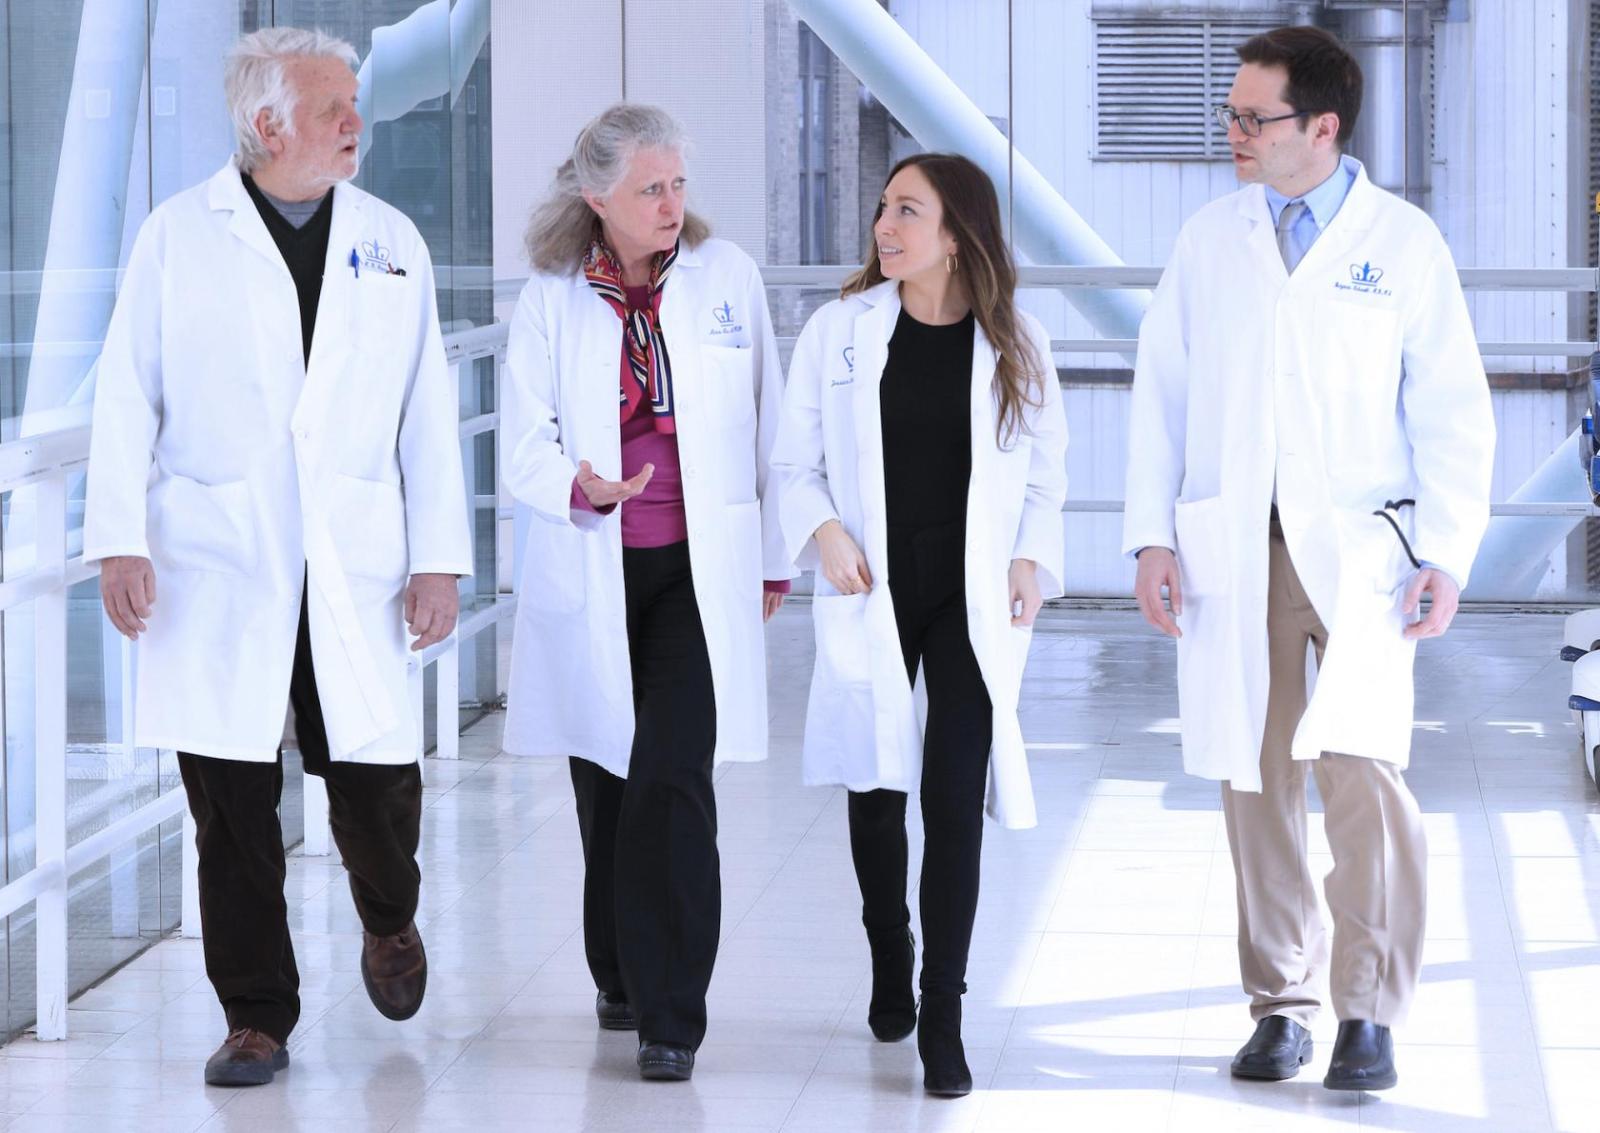 four people in white medical coats walking in a hospital hallway